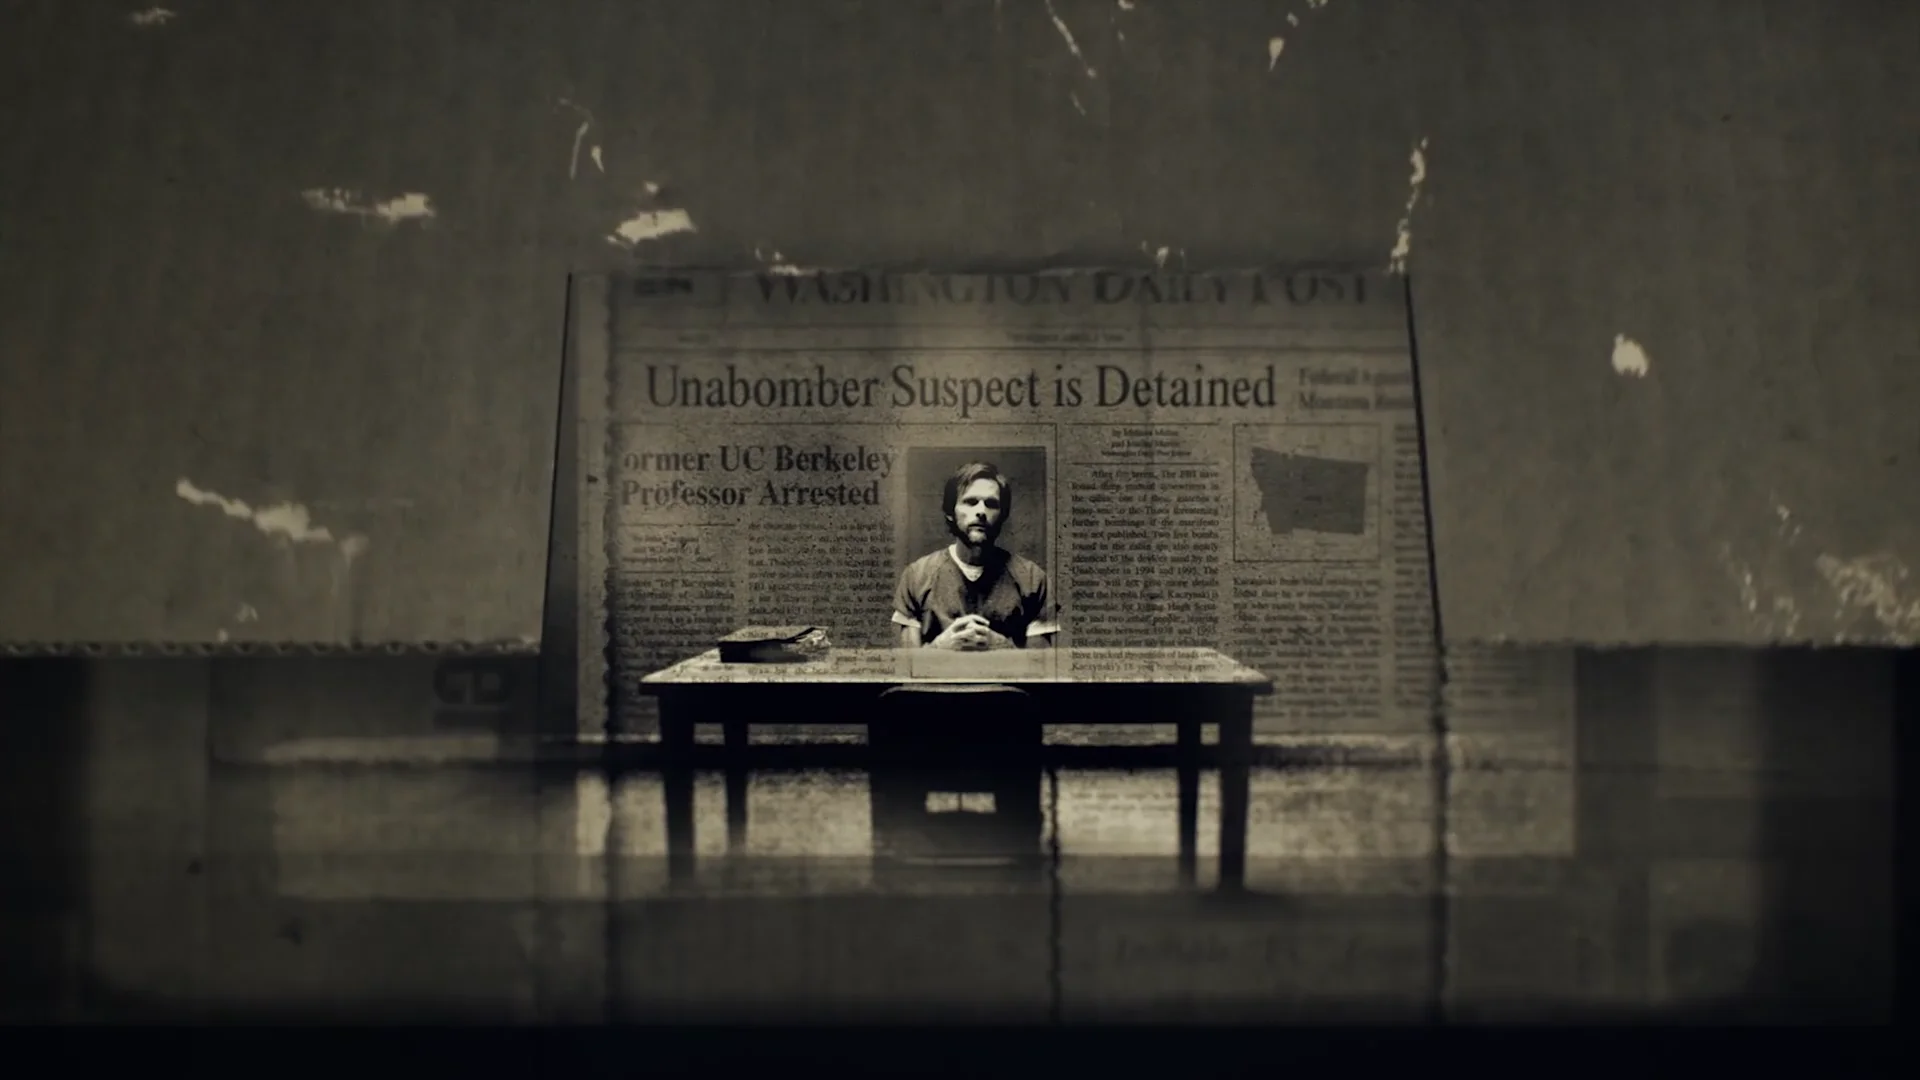 MANHUNT Unabomber Main Title sequence on Vimeo